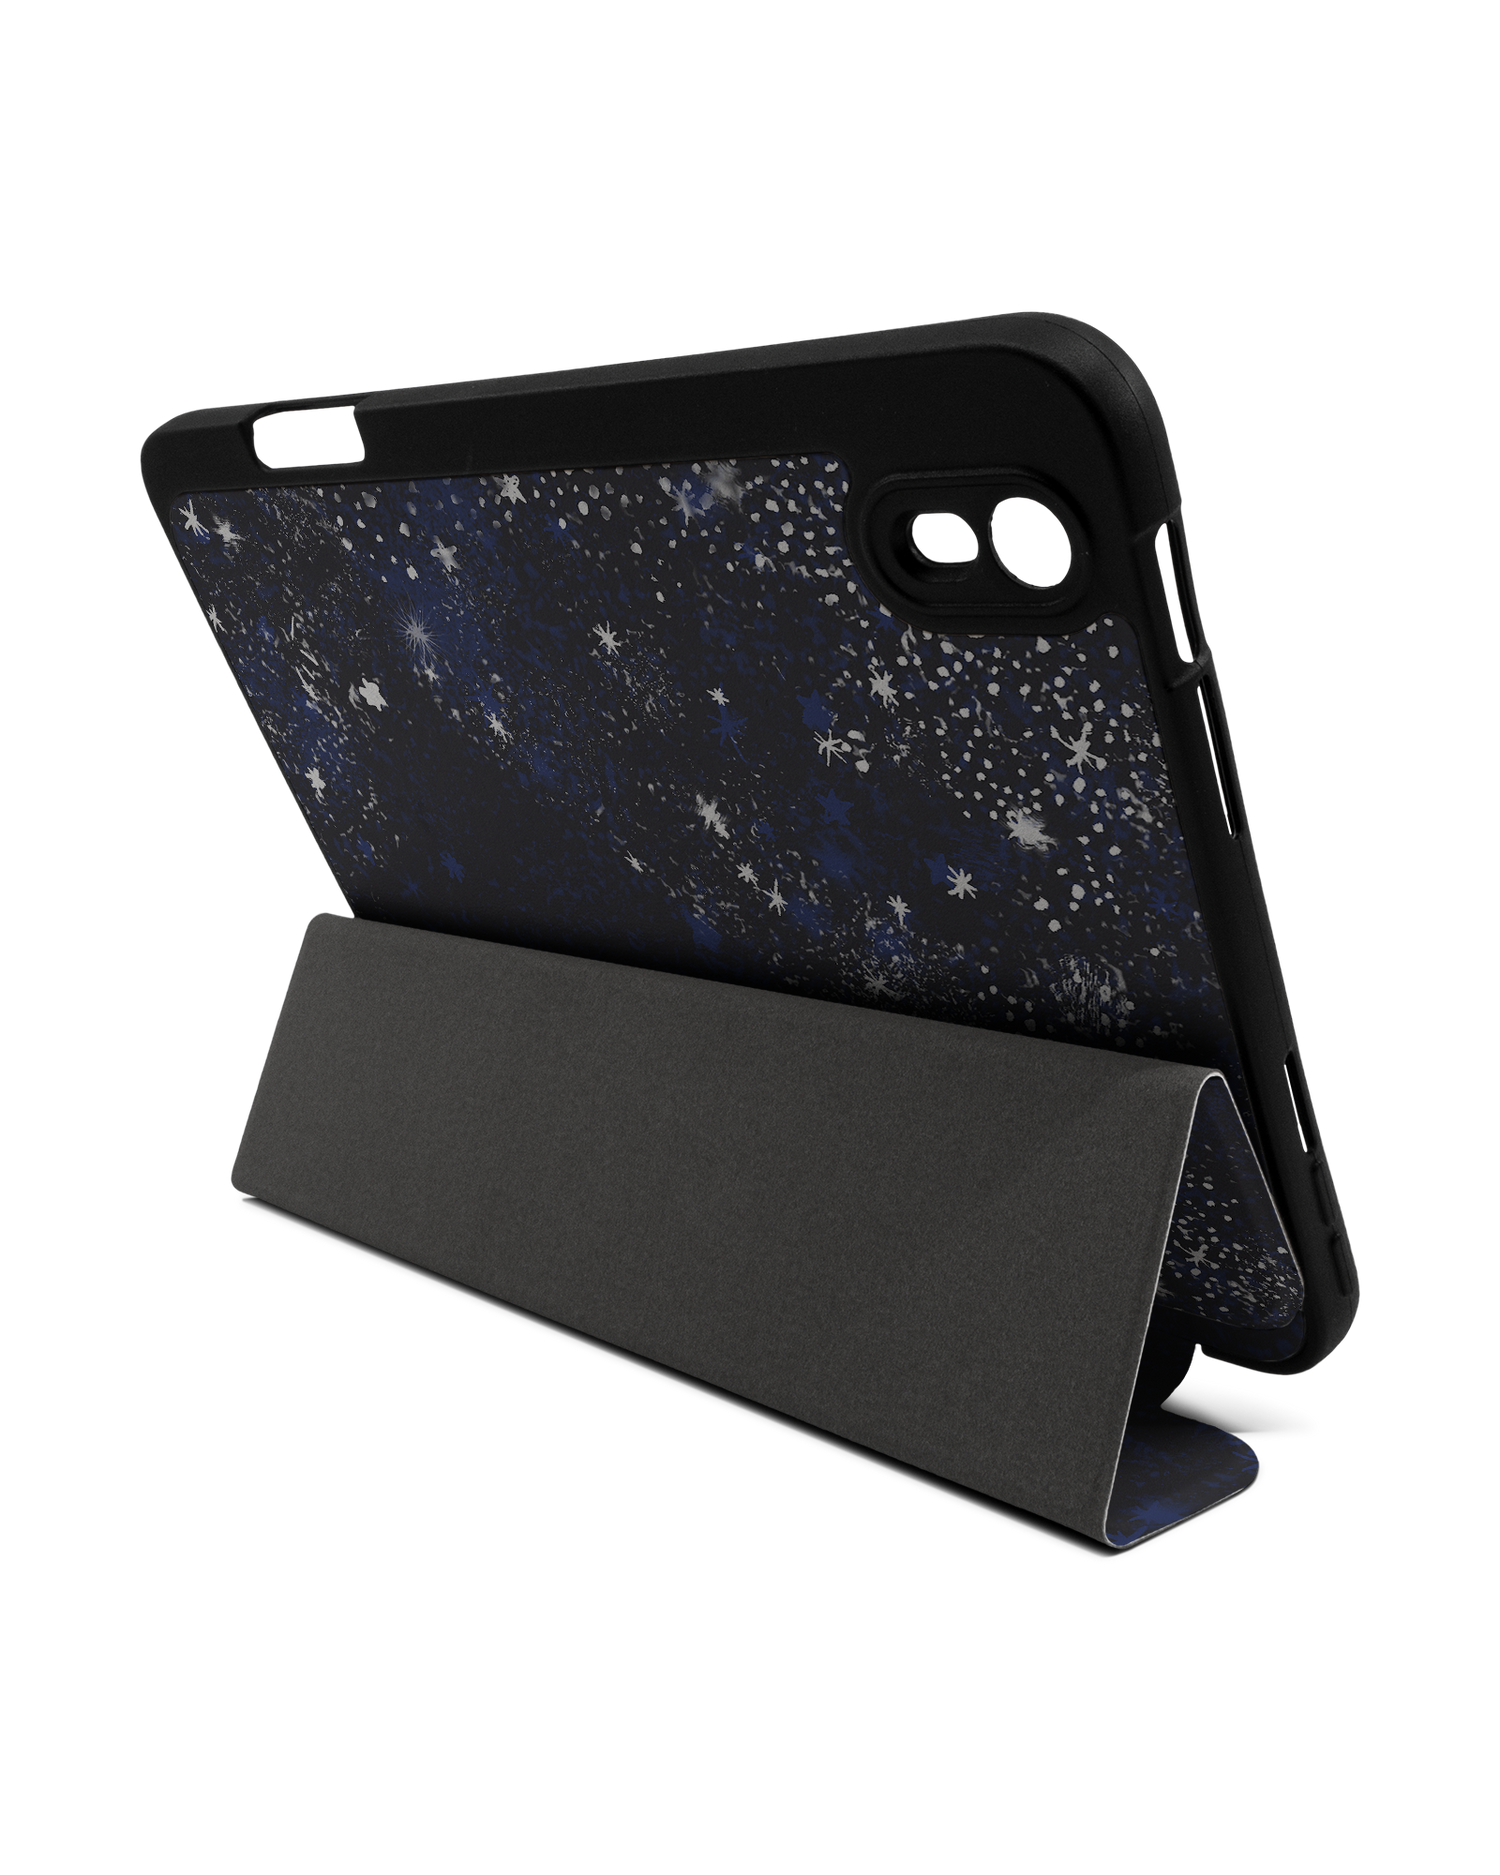 Starry Night Sky iPad Case with Pencil Holder Apple iPad mini 6 (2021): Set up in landscape format (back view)